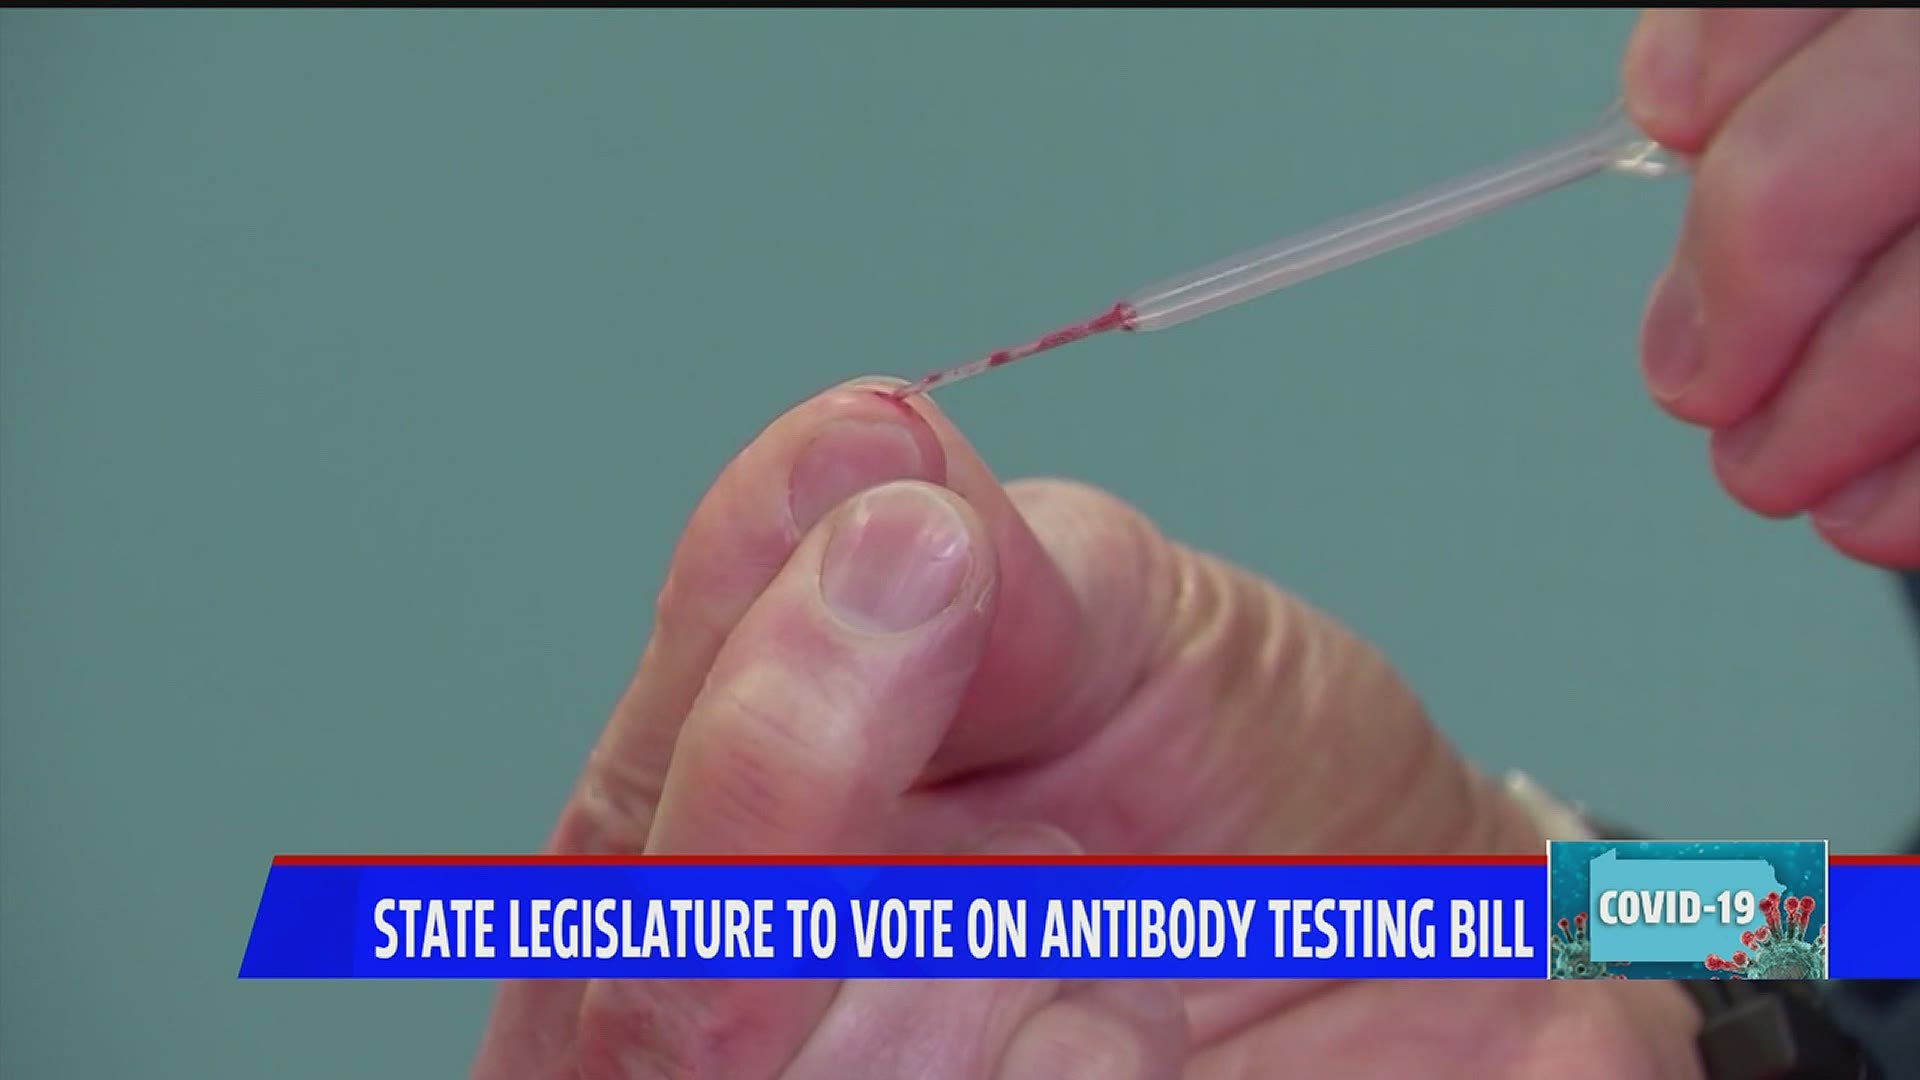 Antibody testing by local health departments would be used to test first-responders and medical personnelo